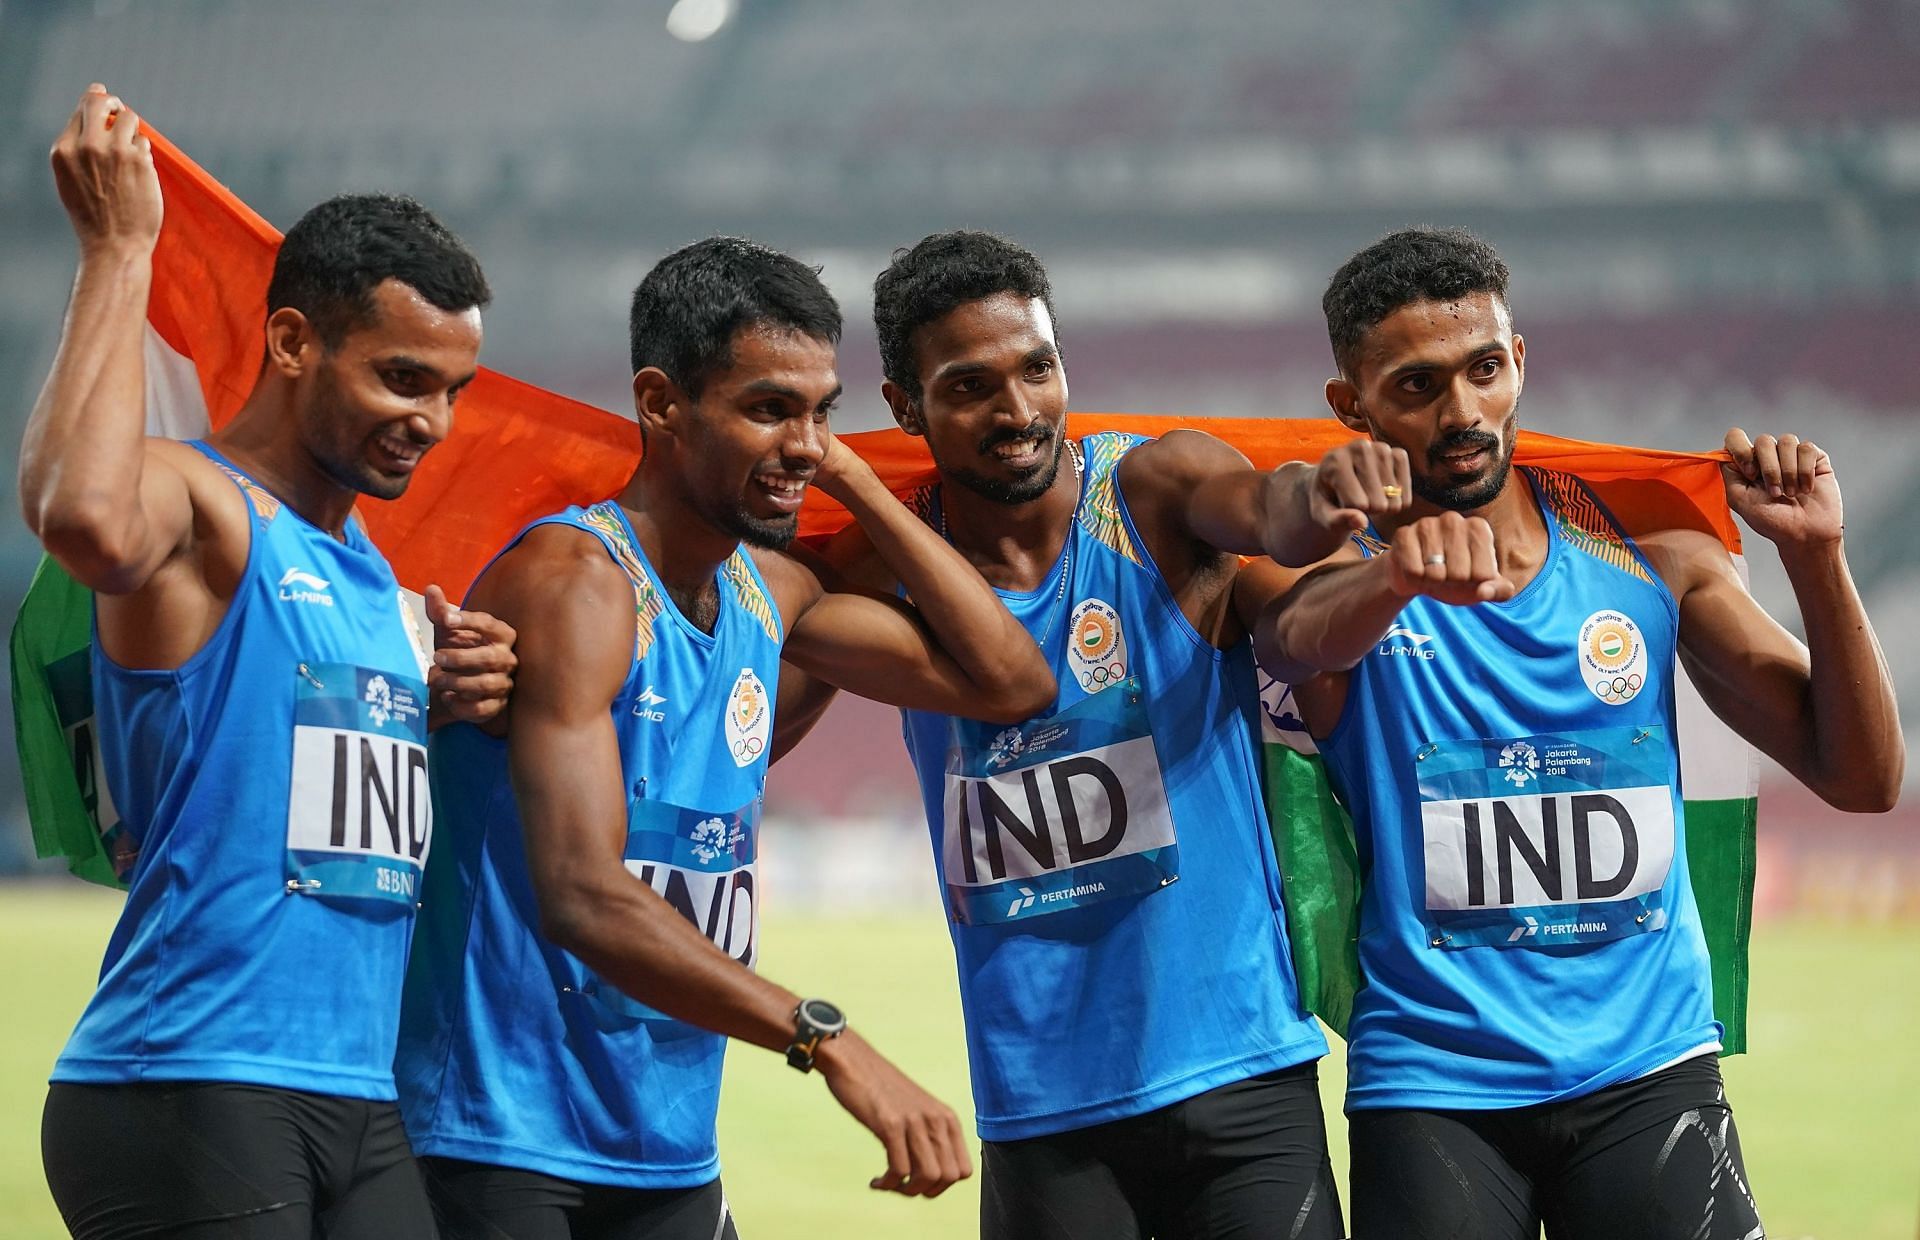 Indian relay team at the Asian Games 